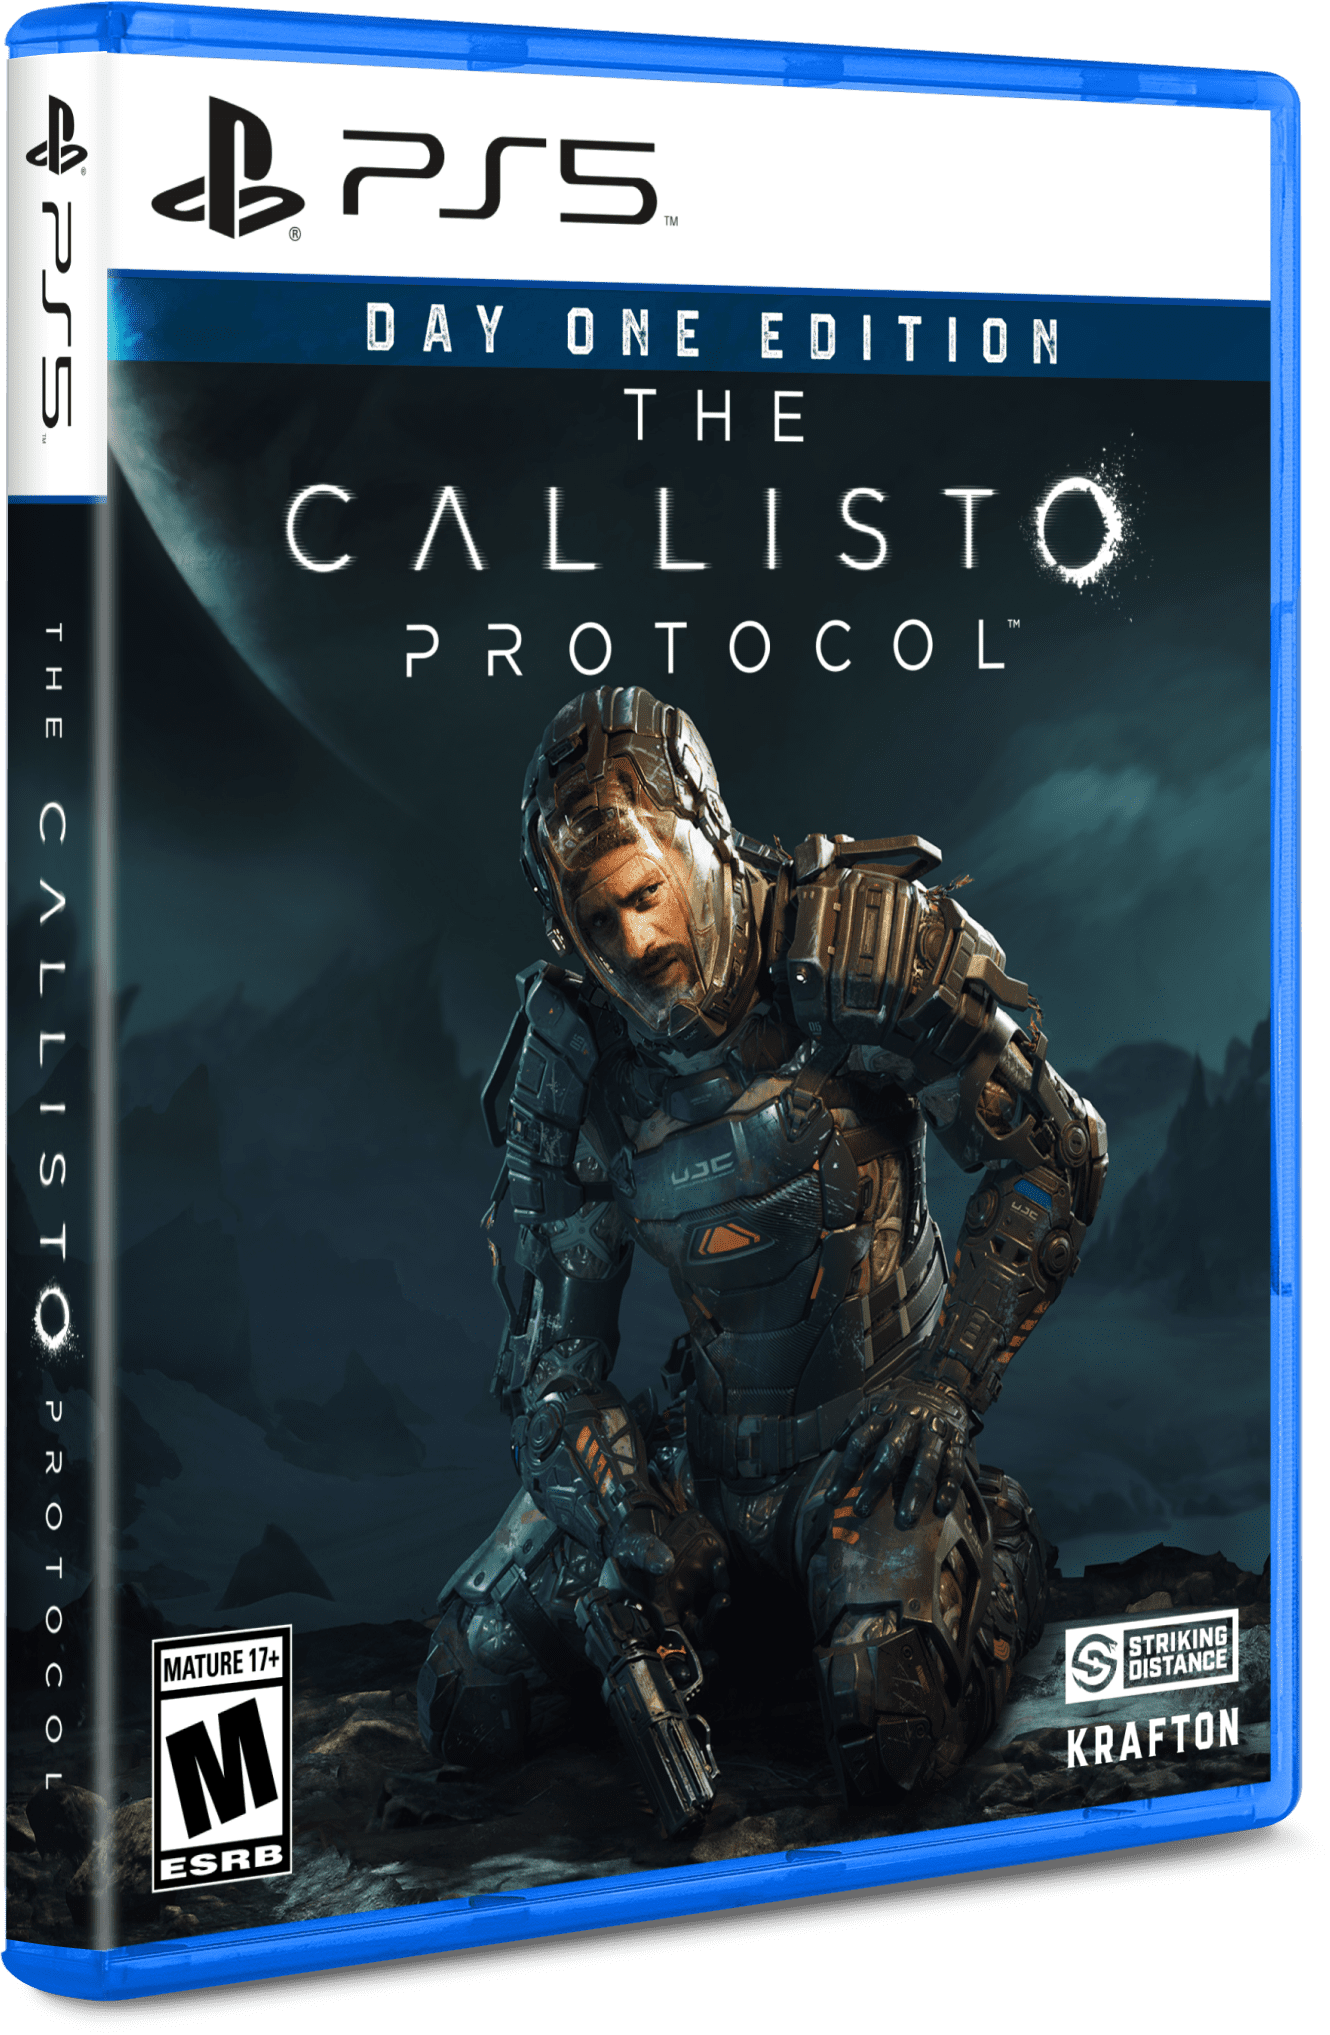 The Callisto Protocol – Day One Edition - Playstation 4